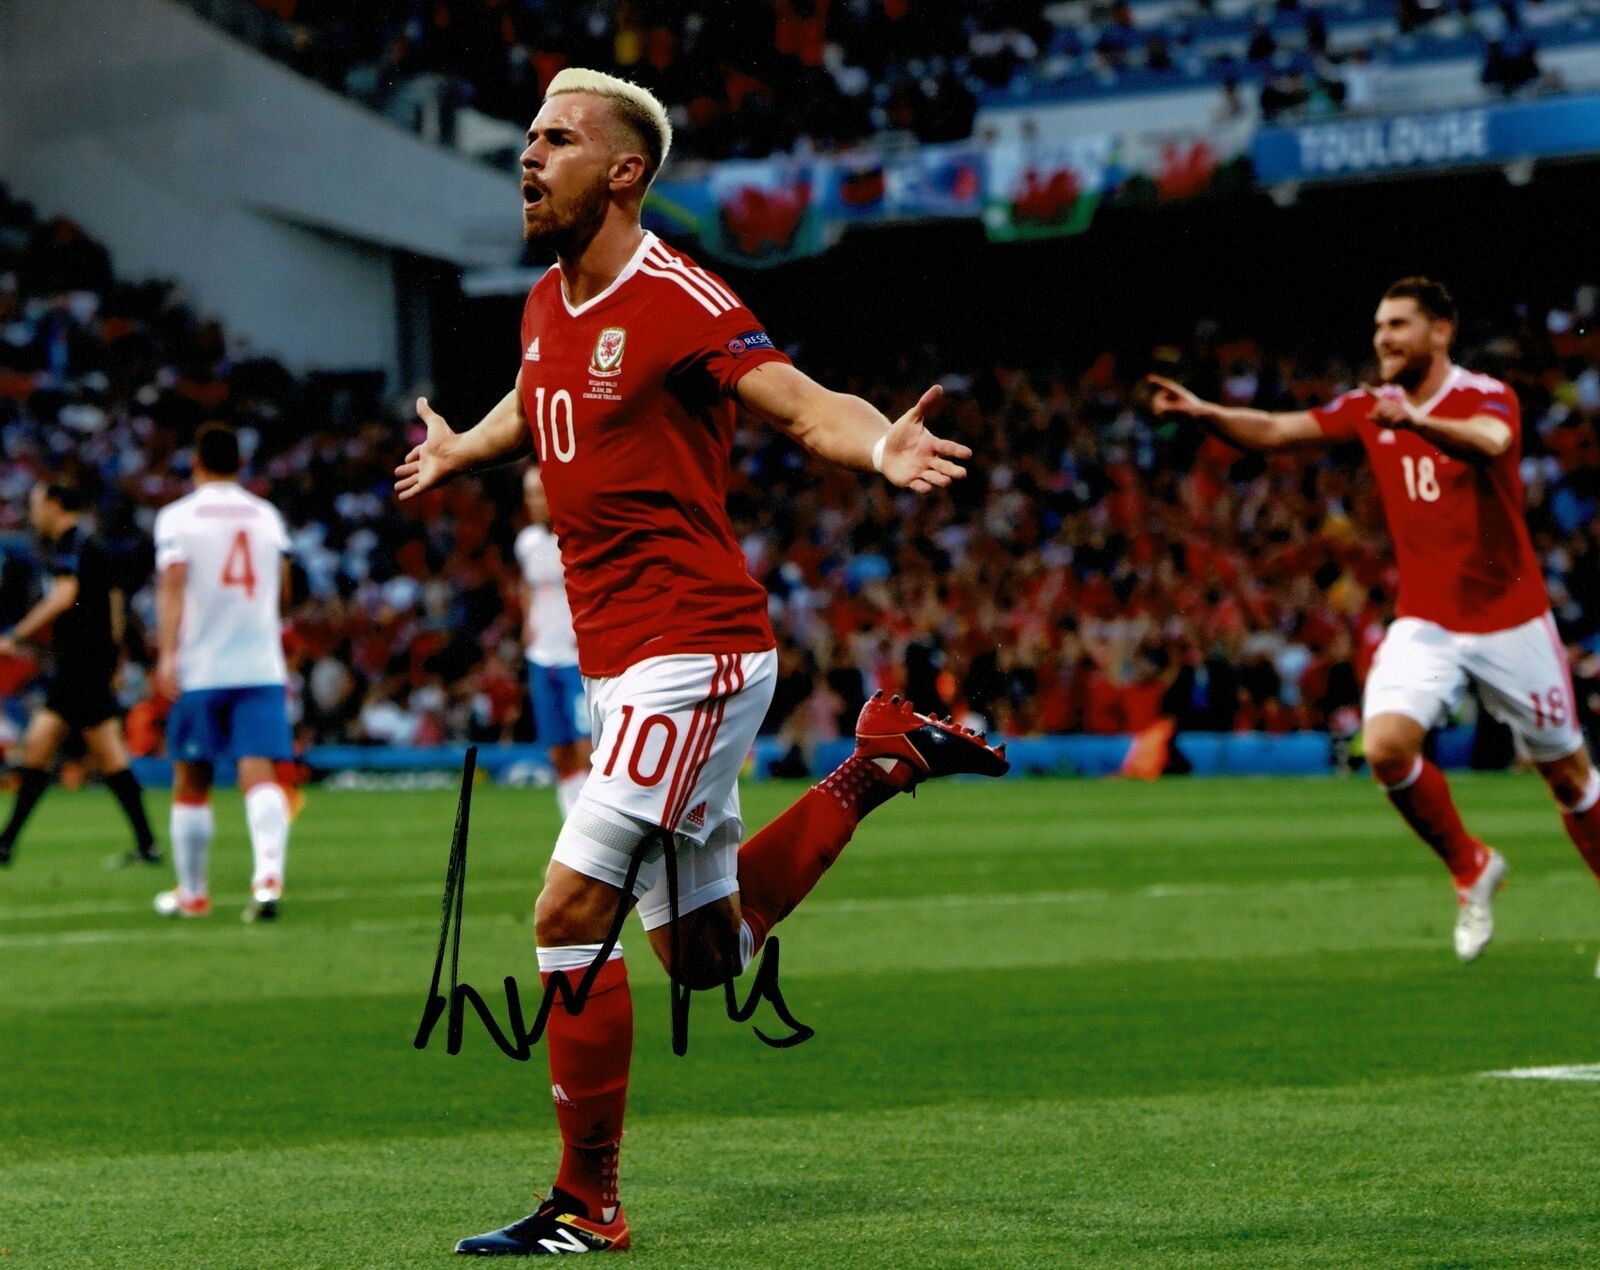 Aaron Ramsey Signed 10X8 Photo Poster painting Wales Euro 2016 Genuine Signature AFTAL COA (1191